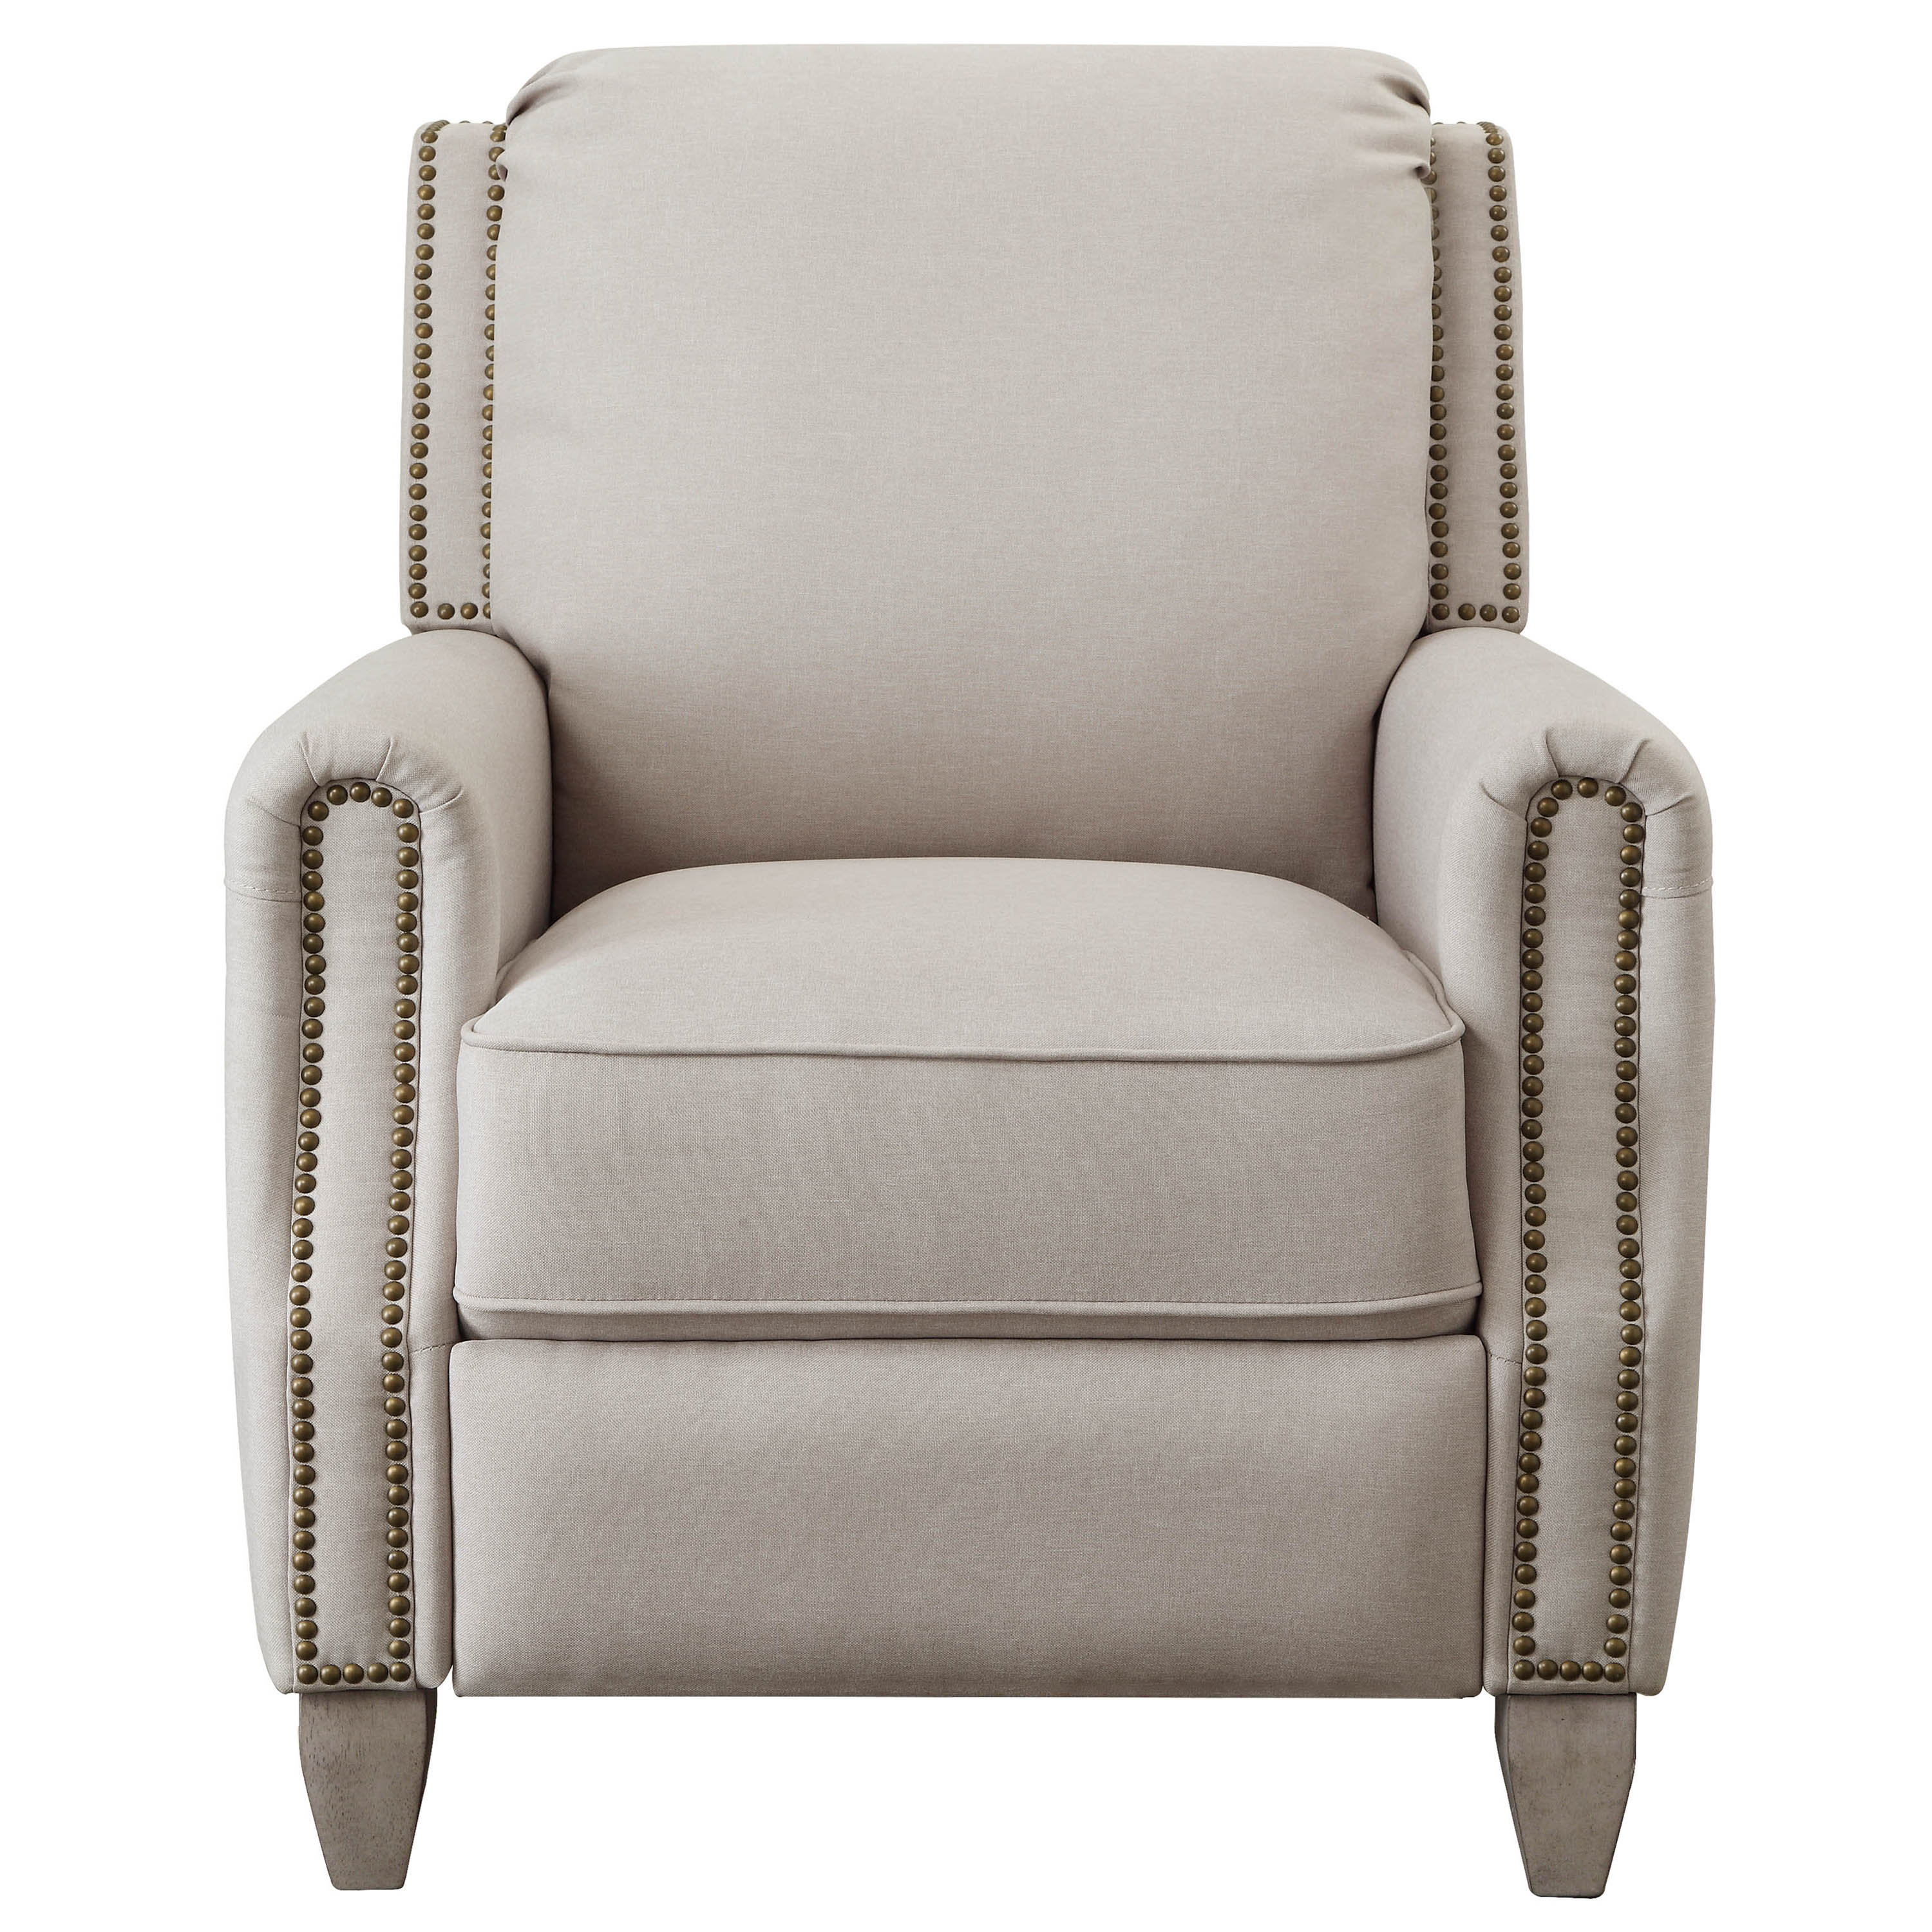 Better Homes and Gardens Pushback Recliner, Taupe Fabric Upholstery - image 4 of 7